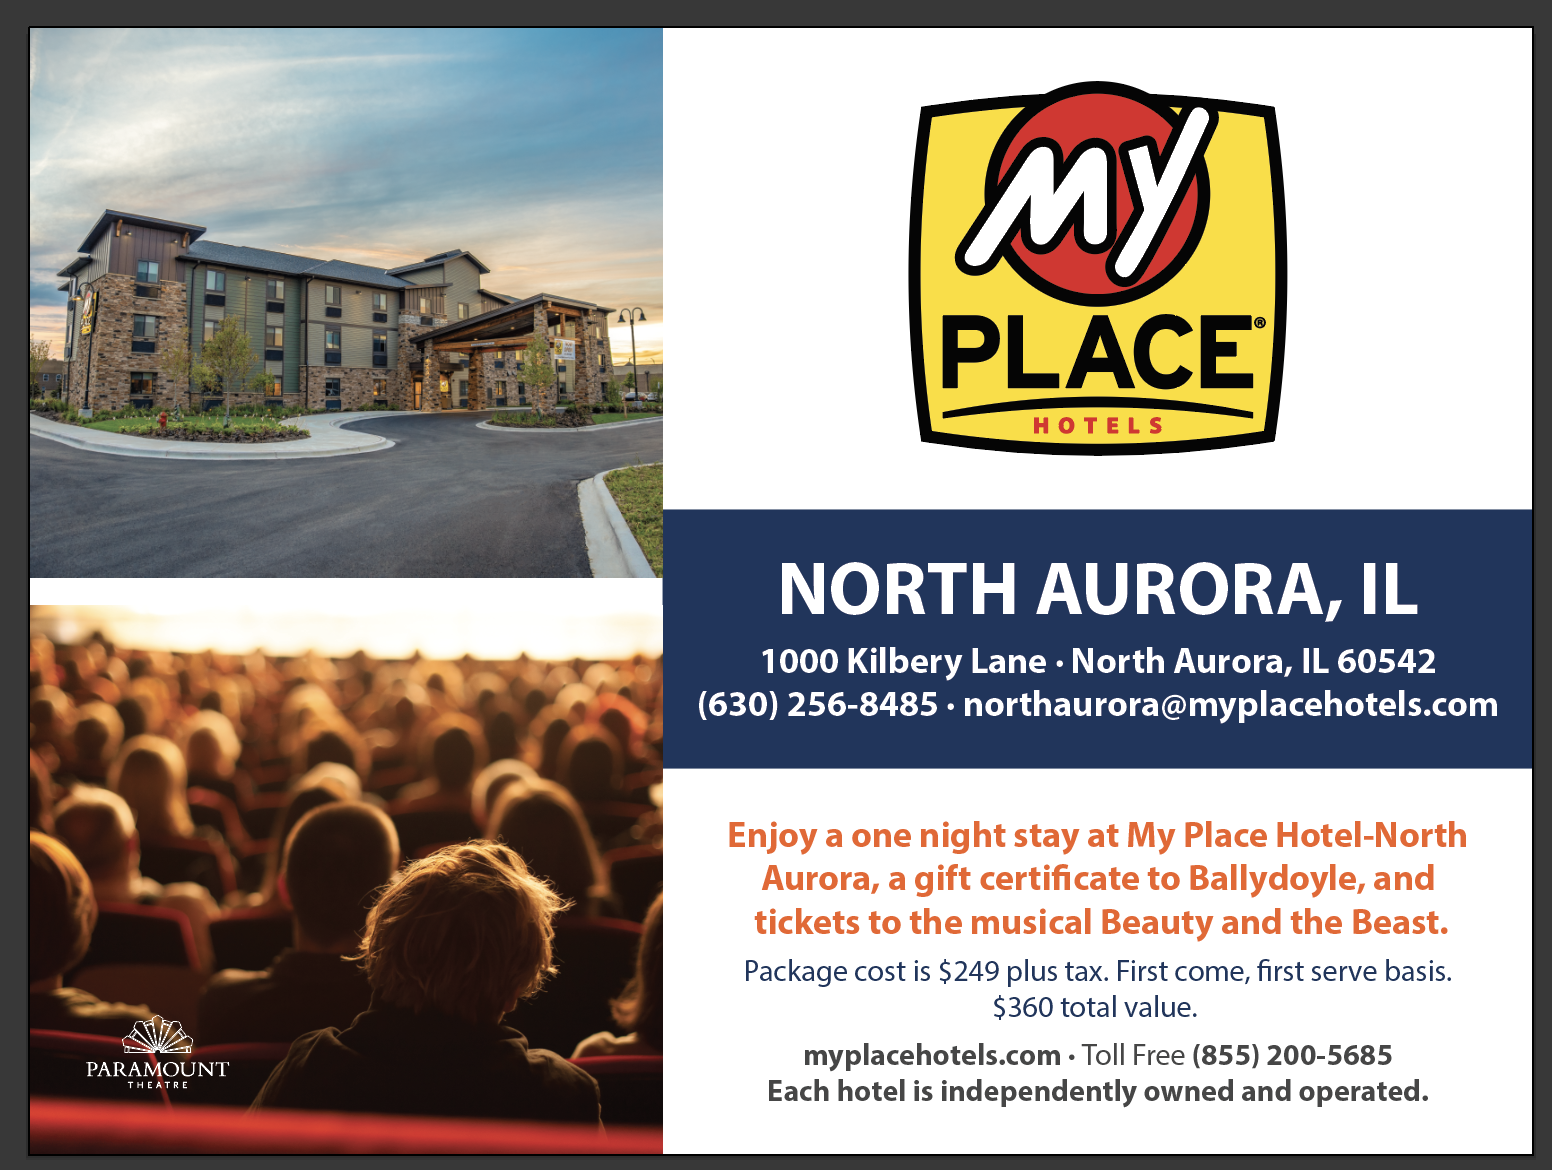 Stay+Theatre+Dining Package at My Place Hotels - N. Aurora